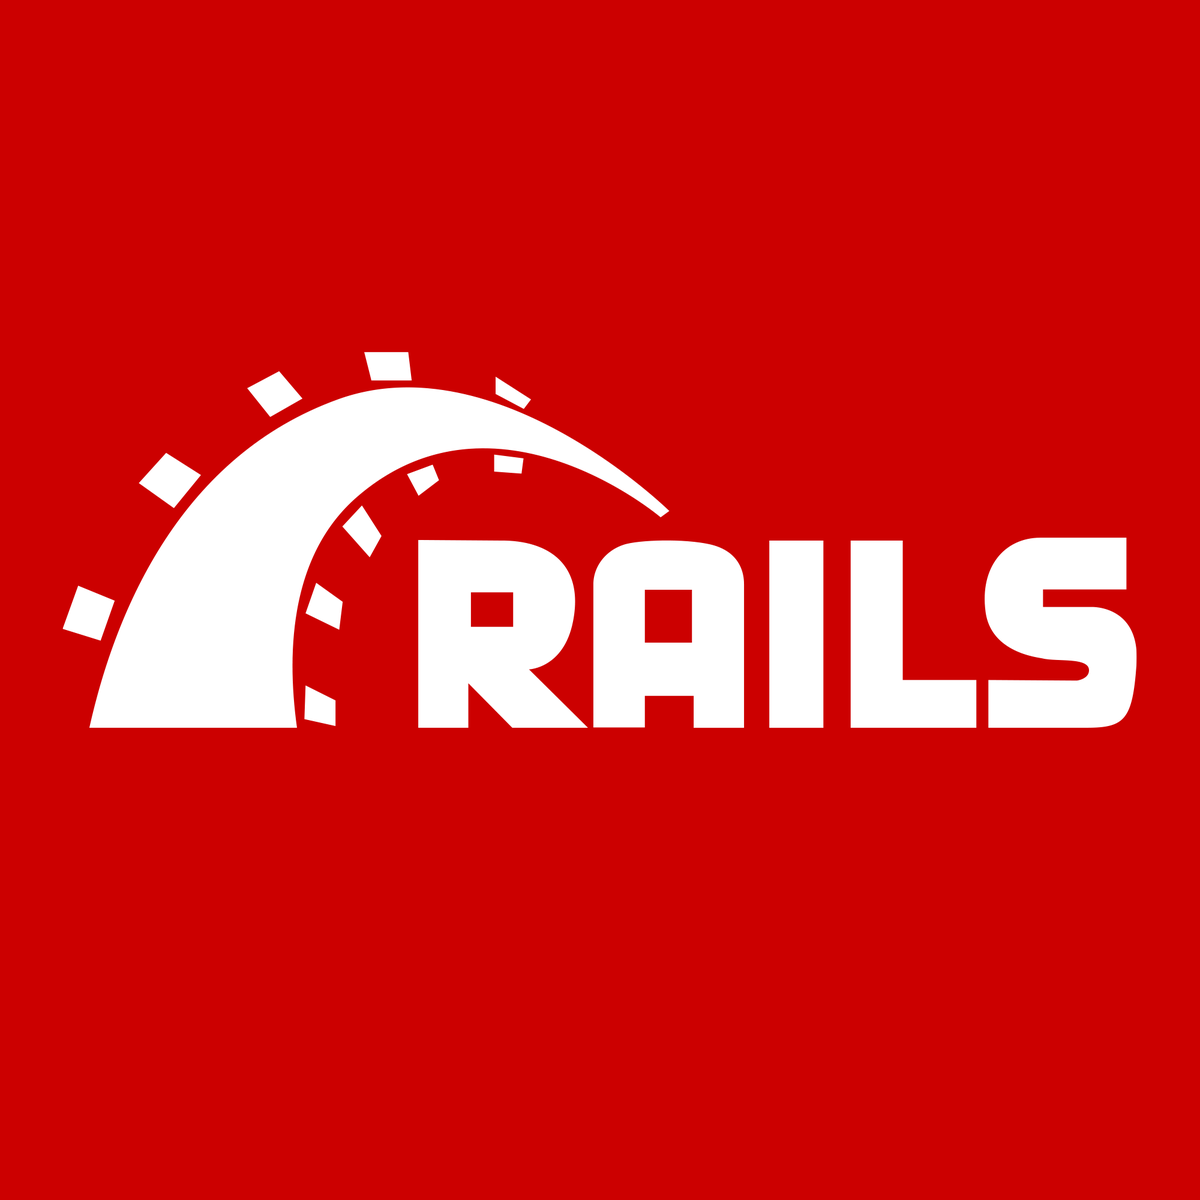 Sessions in Rails: Everything You Need to Know